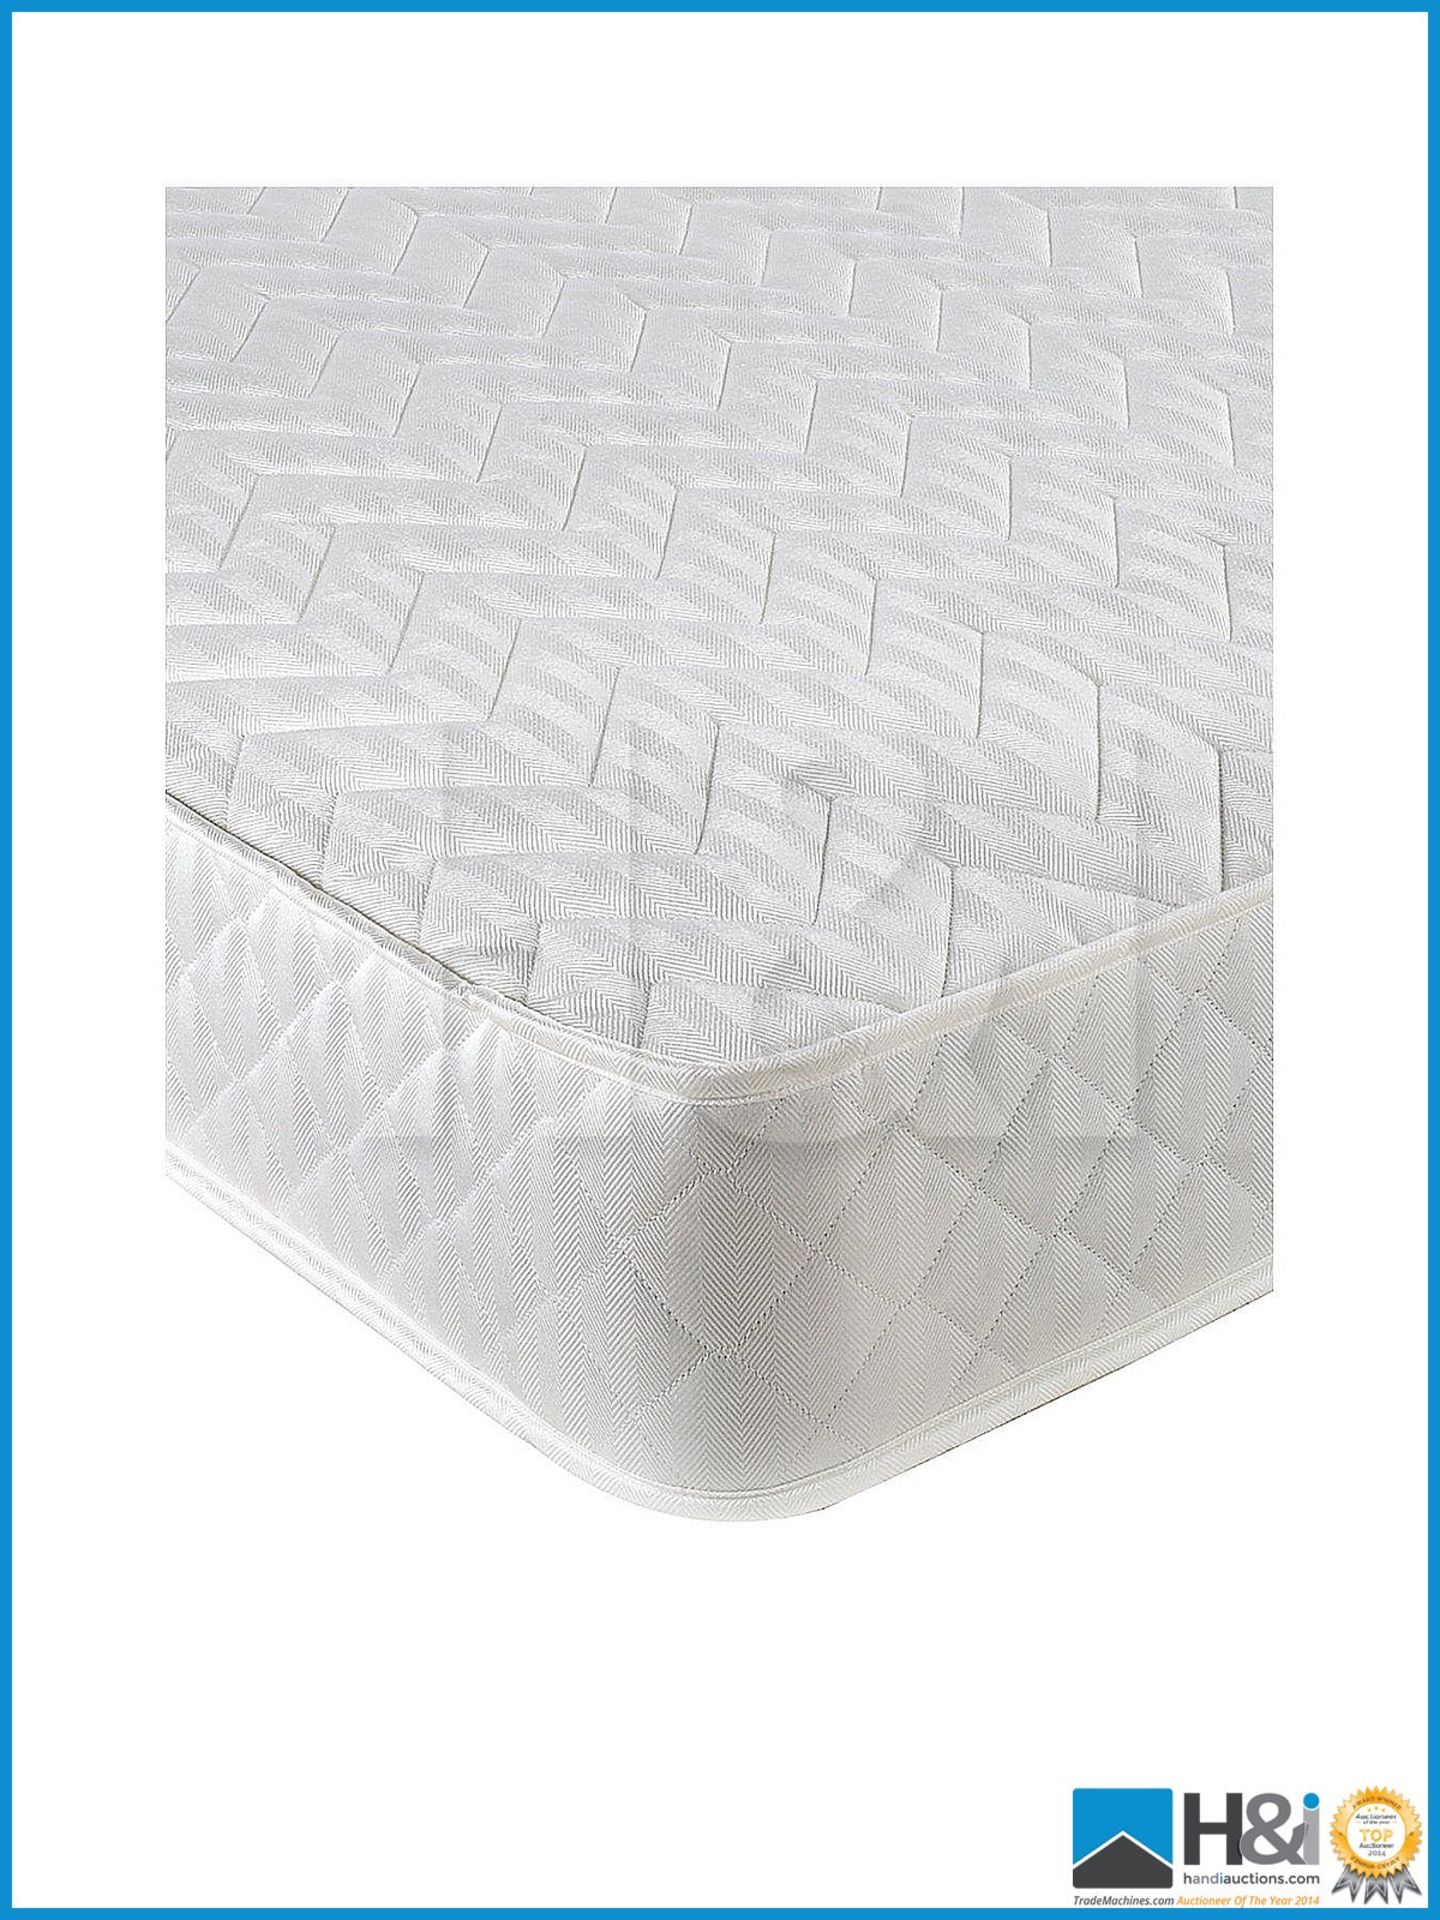 NEW AIRSPRUNG LUXURY QUILTED SAMLL DOUBLE MATTRESS RRP GBP 309